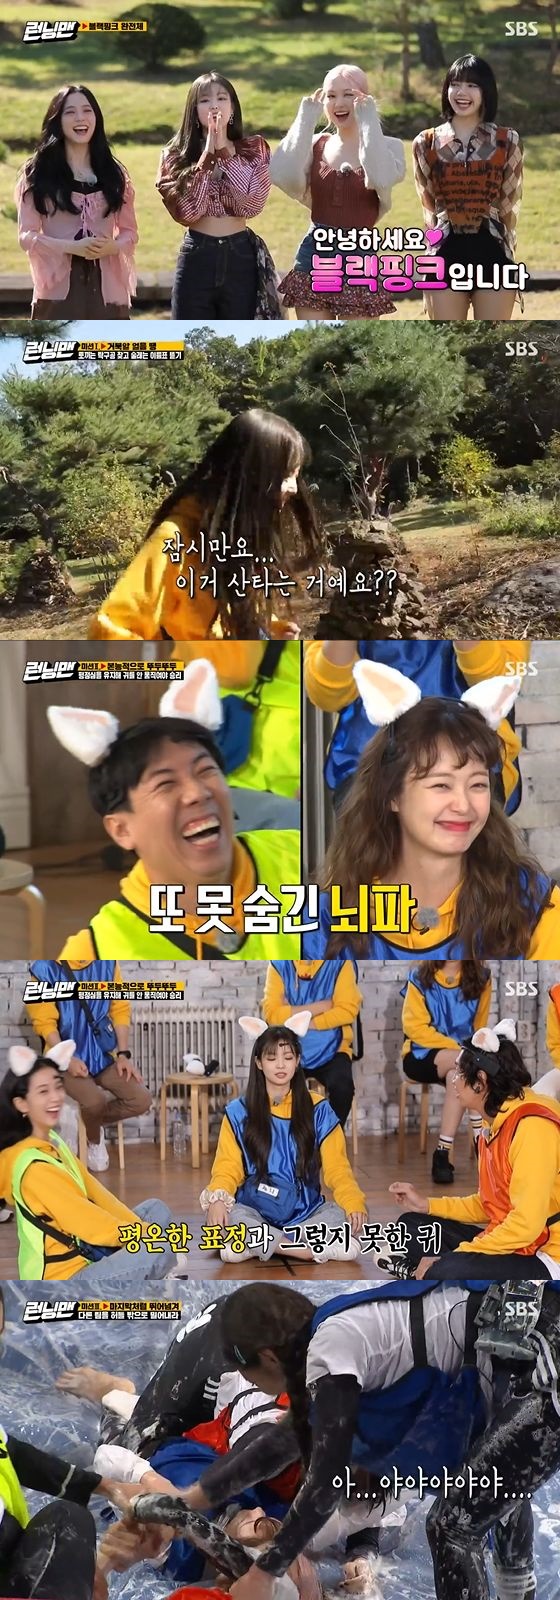 On the 18th, SBS entertainment program Running Man was conducted with guest BLACKPINK as Lets get it from the probability Race.In particular, Jeon So-min was selected as a penalty for Race last week and appeared as a Daily BLACKPINK member.Members were surprised by the appearance of Jeon So-min, who choreographed Lovesick Girls among BLACKPINK members, saying, What are you doing there? Its creepy.The first mission on the day was to find a hidden ping-pong ball to avoid the team with Turtle Ice Ding.BLACKPINK members were motivated to open the name tag, but they quickly laughed as their physical strength was discharged.The JiSoo team won the first place and the Rose & Lisa team received 10 penalties.The next mission was instinctively toutoudo mission, and the team member wearing the cat ear for each round had to maintain the utmost calm.Yang Se-chan, who experienced cat ears, said, I can not hide my feelings.Jeon So-min and Yang Se-chan held each others hands and asked, Do you like me? And set fire to the two youth dramas.Jenny Kim also laughed as a response vending machine by revealing that Lisa is the most dirty member of the room.The second missions top spot was Team Jenny Kim.In the meantime, Chungson Rookie Jenny Kim and Lisa won two consecutive penalties for 10 penalties, making the intestinal tract a crucible of excitement.The final mission was to push other teams out of the hurdles.Kim Jong Kook X Lee Kwang Soo won the first mens Kyonggi and JiSoo X Song Ji-hyo won the womens Kyonggi.Jenny Kim laughed at the fierce Kyonggi, saying, Is the product worth that much?Rose, Haha and Sechan won the final rice cake settlement and received the product. The product was rice cake.On the other hand, Yoo Jae-Suk and Ji Suk-jin among the most penalty candidates left rice cakes were painted.